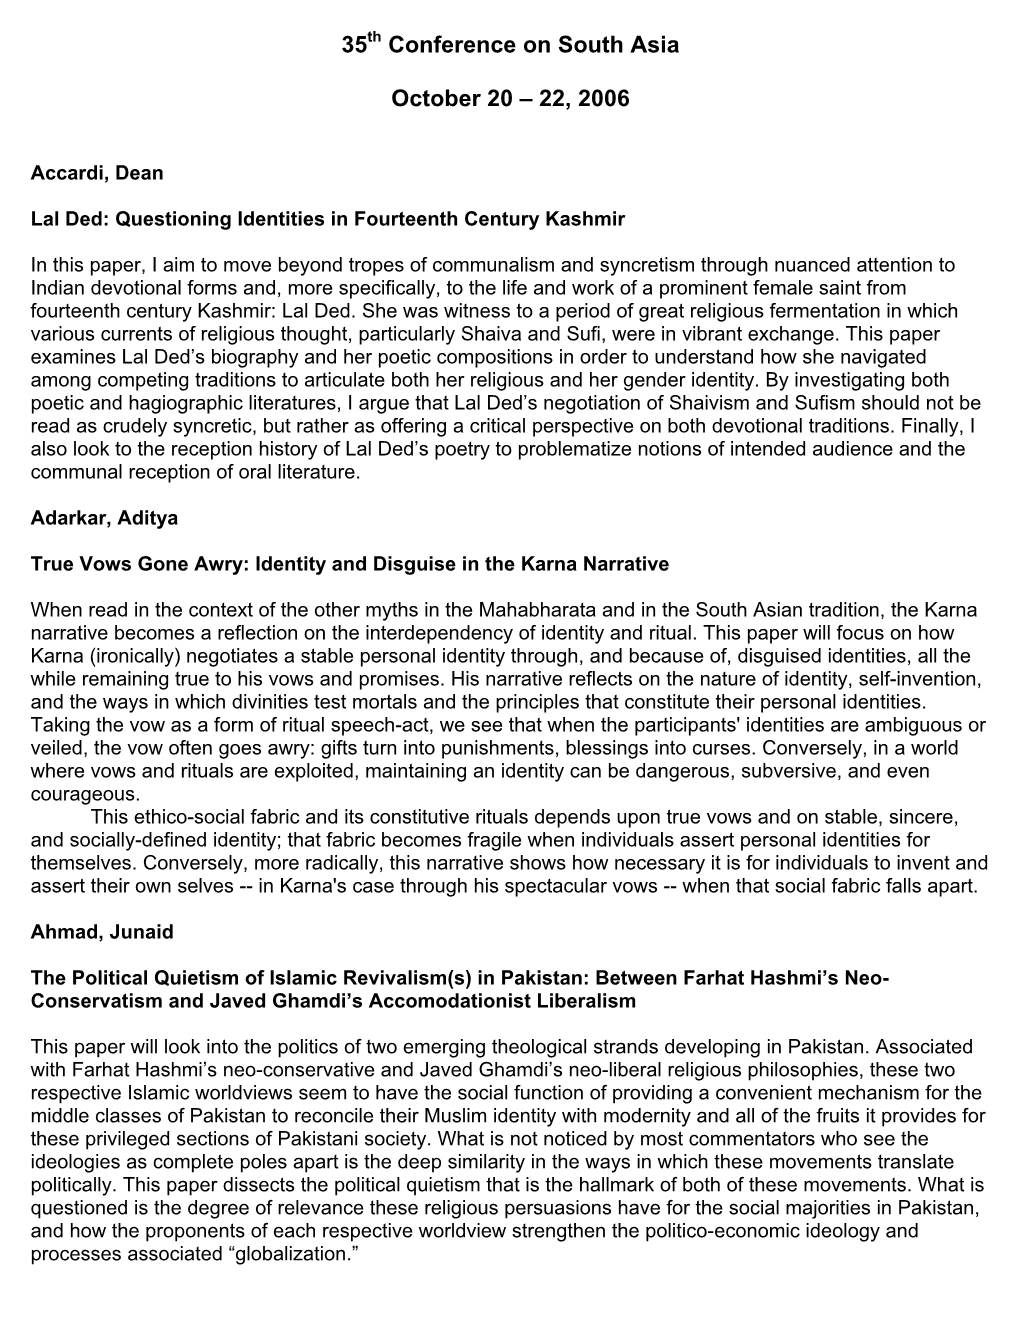 The 35Th Annual Conference on South Asia (2006) Paper Abstracts